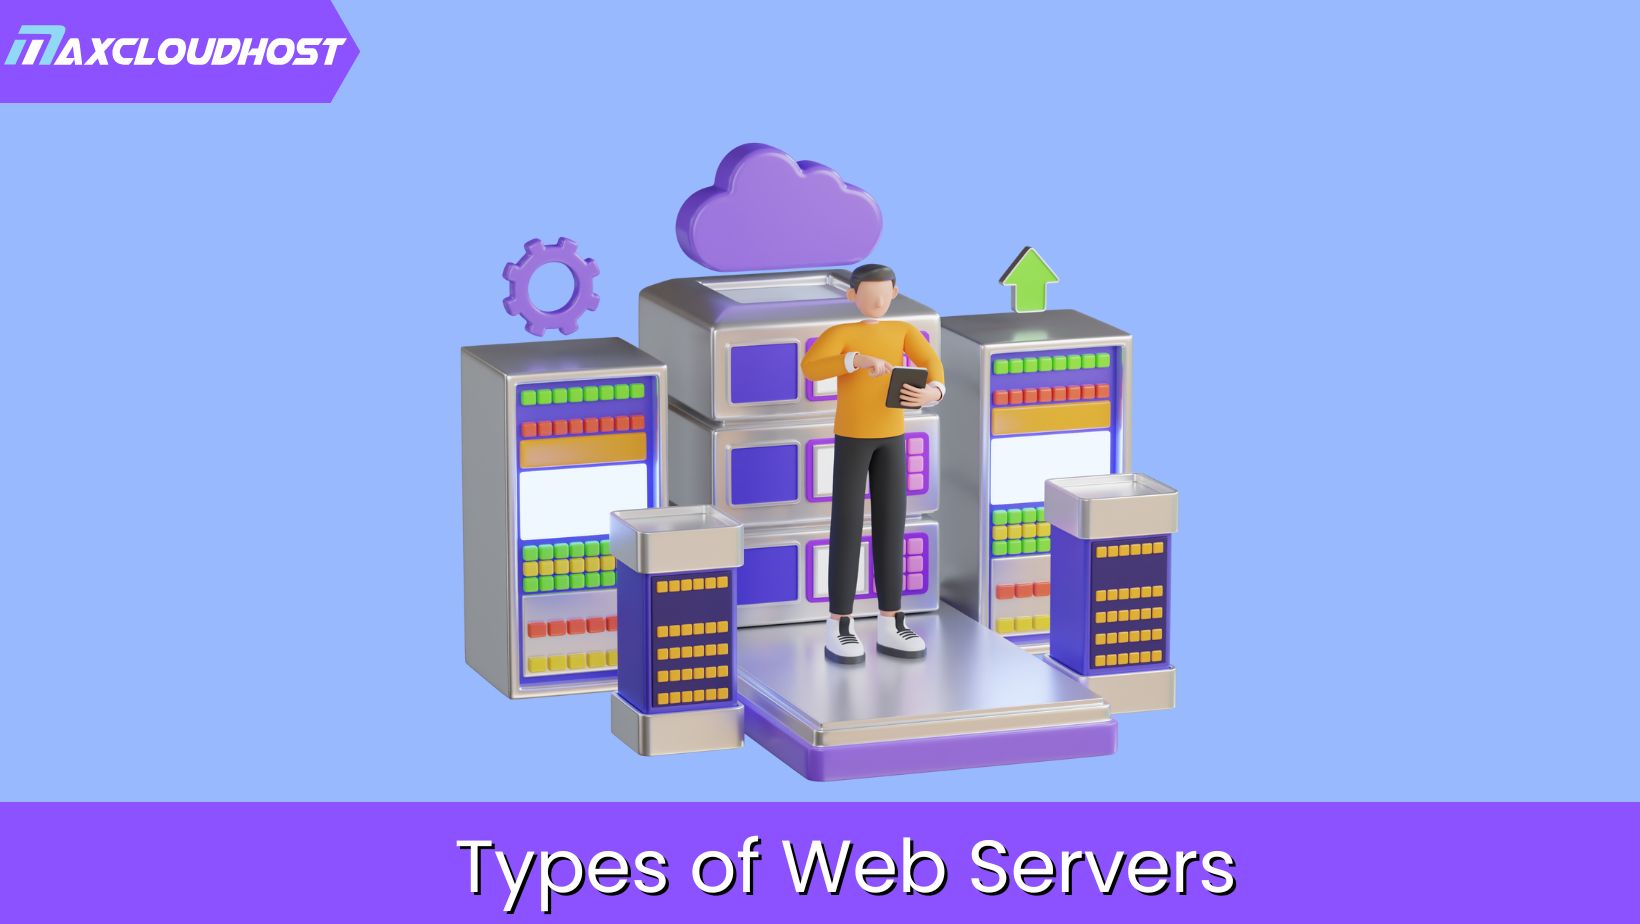 Understanding Web Servers: Types and Technical Details